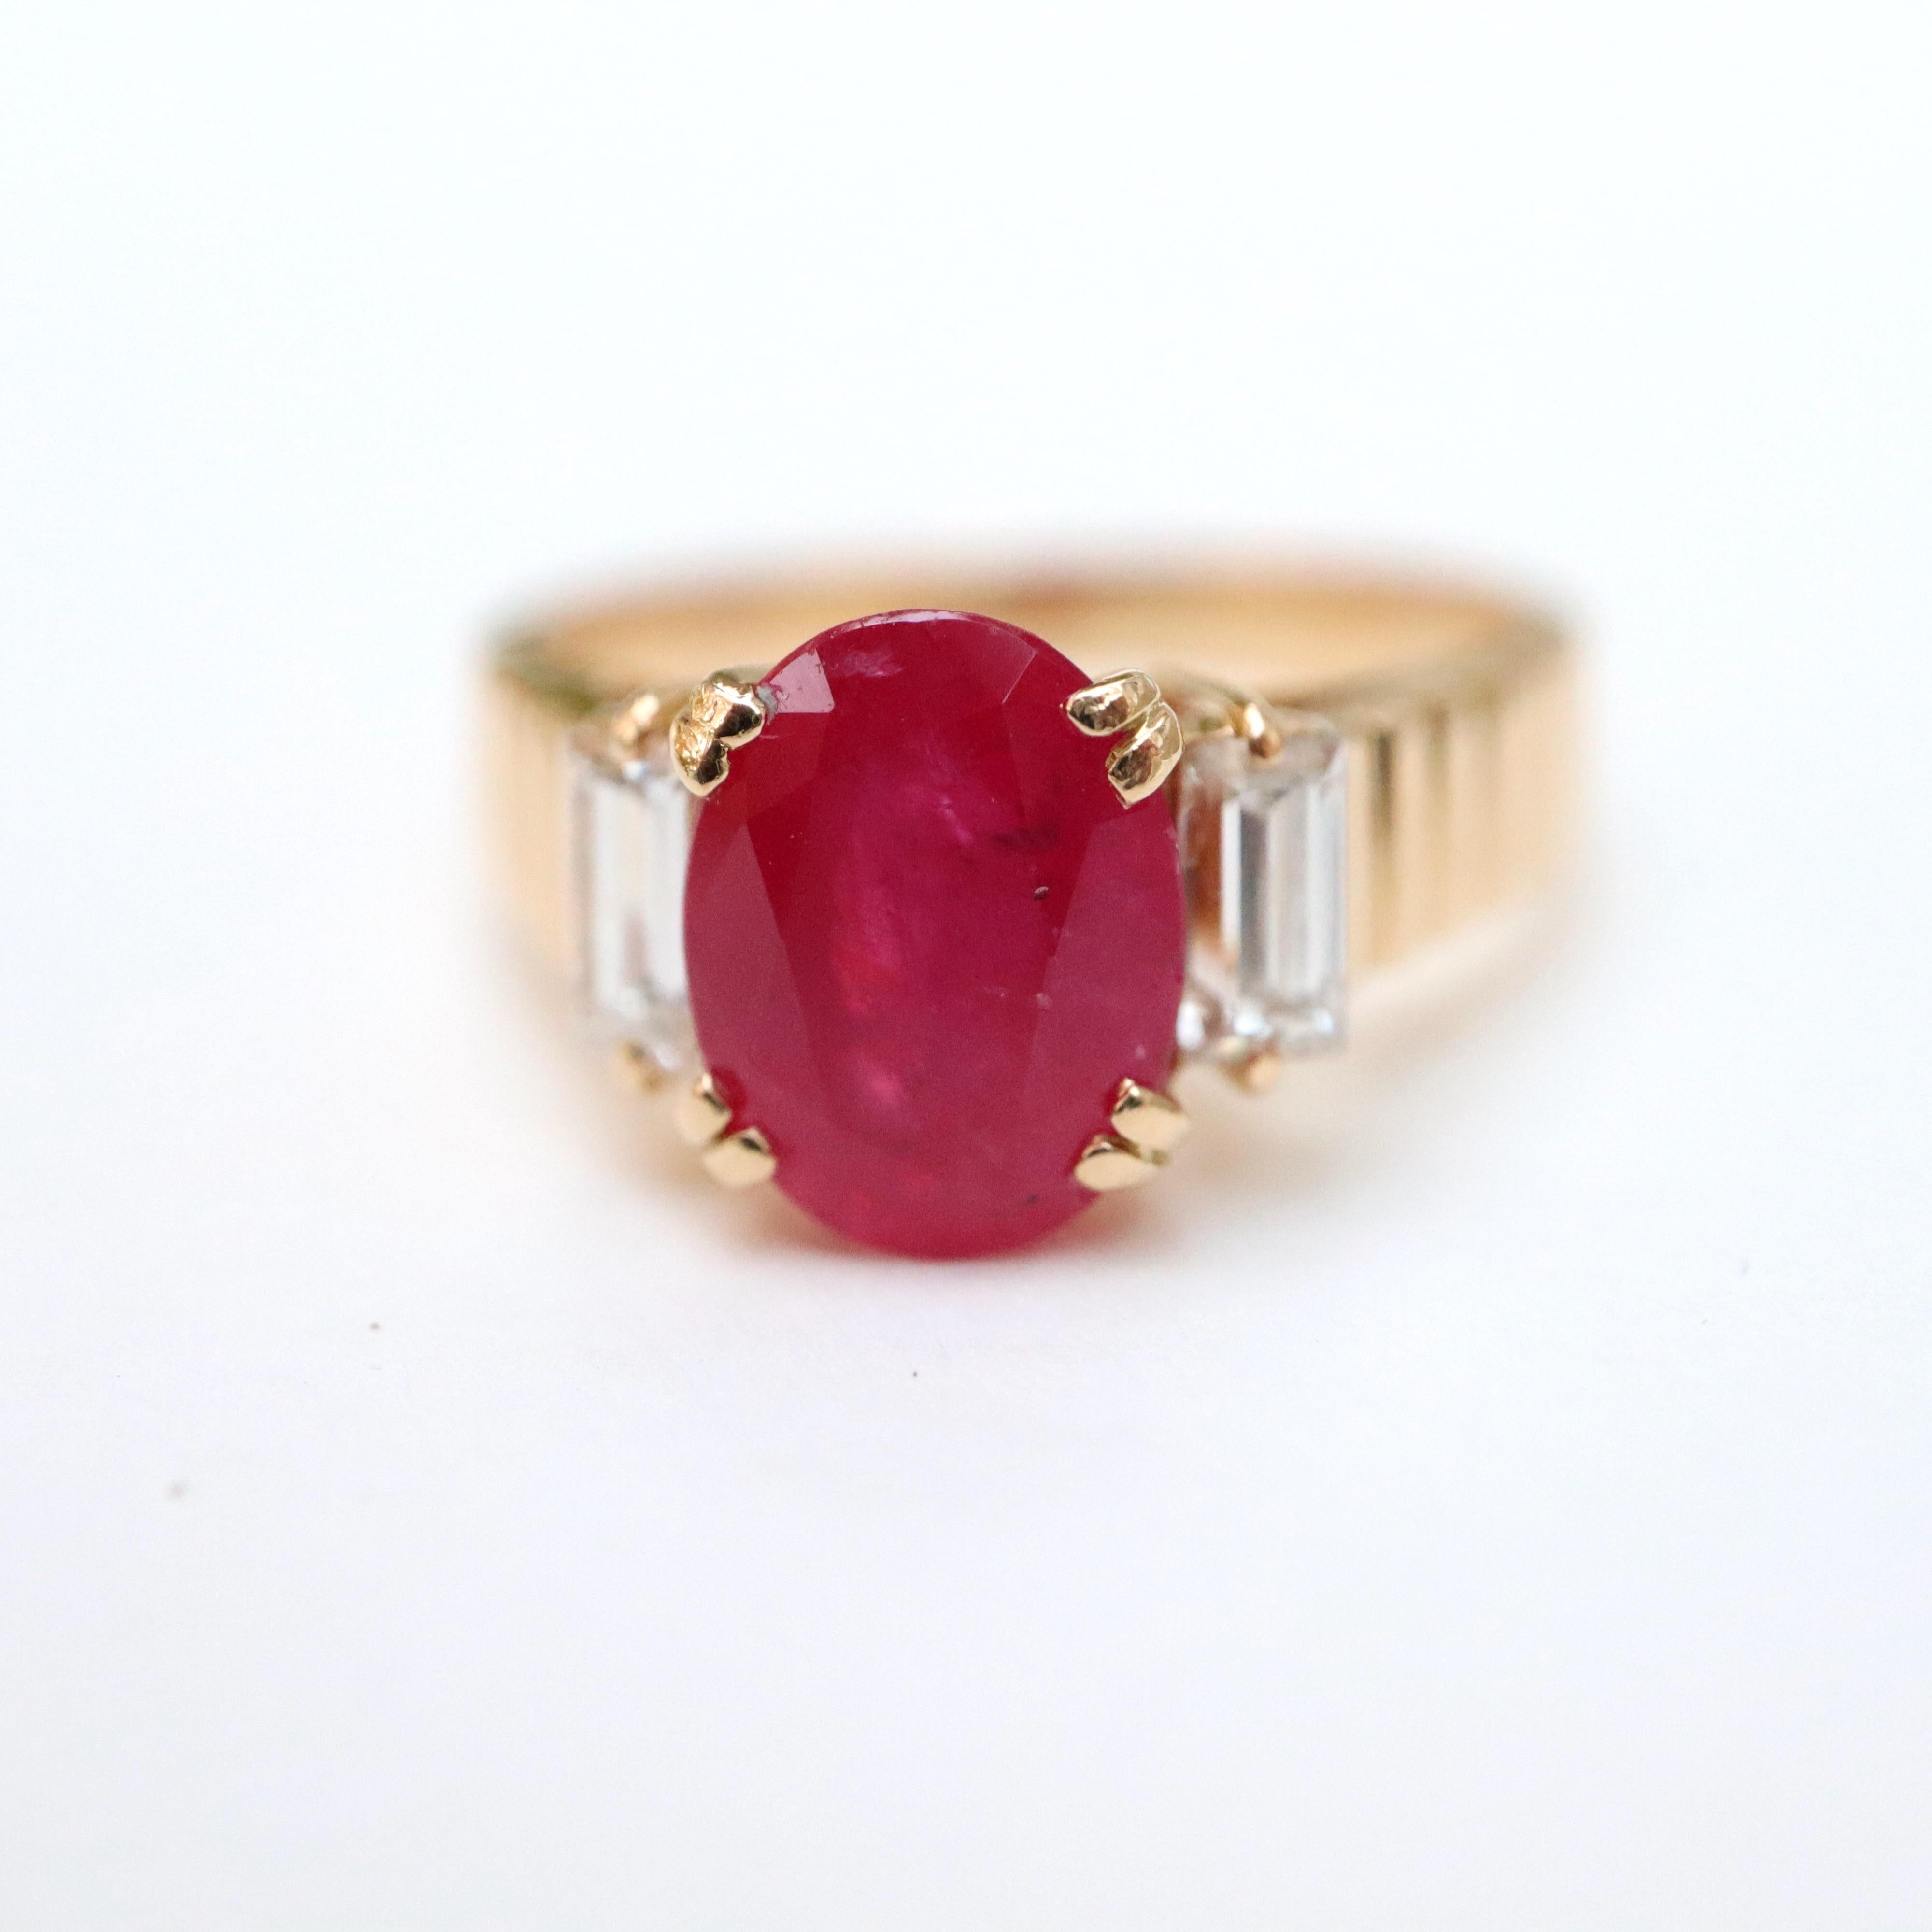 18K Yellow Gold Ruby Ring and Diamonds vintage ring
Gadrooned yellow gold ring holding a Ruby of 2.30 Carats set with 4 double claws supported by a Baguette Diamond on either side of 0.20 Carat, total weight of diamonds: 0.4 Carat.
GEMPARIS